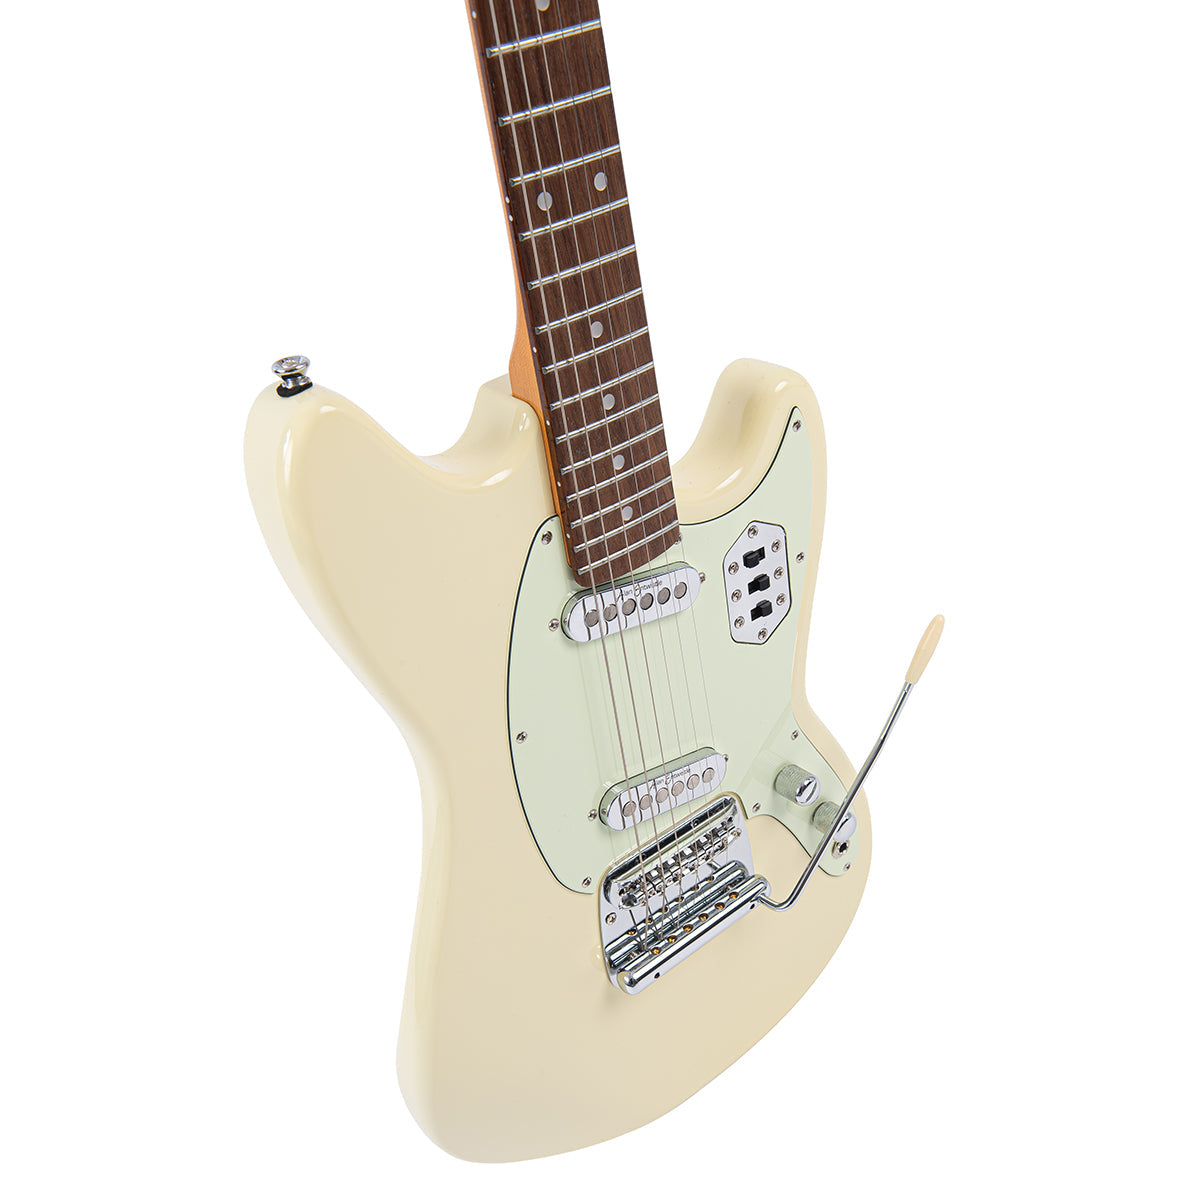 Vintage REVO Series 'Colt SS Twin' ~ Vintage White, Electric Guitars for sale at Richards Guitars.